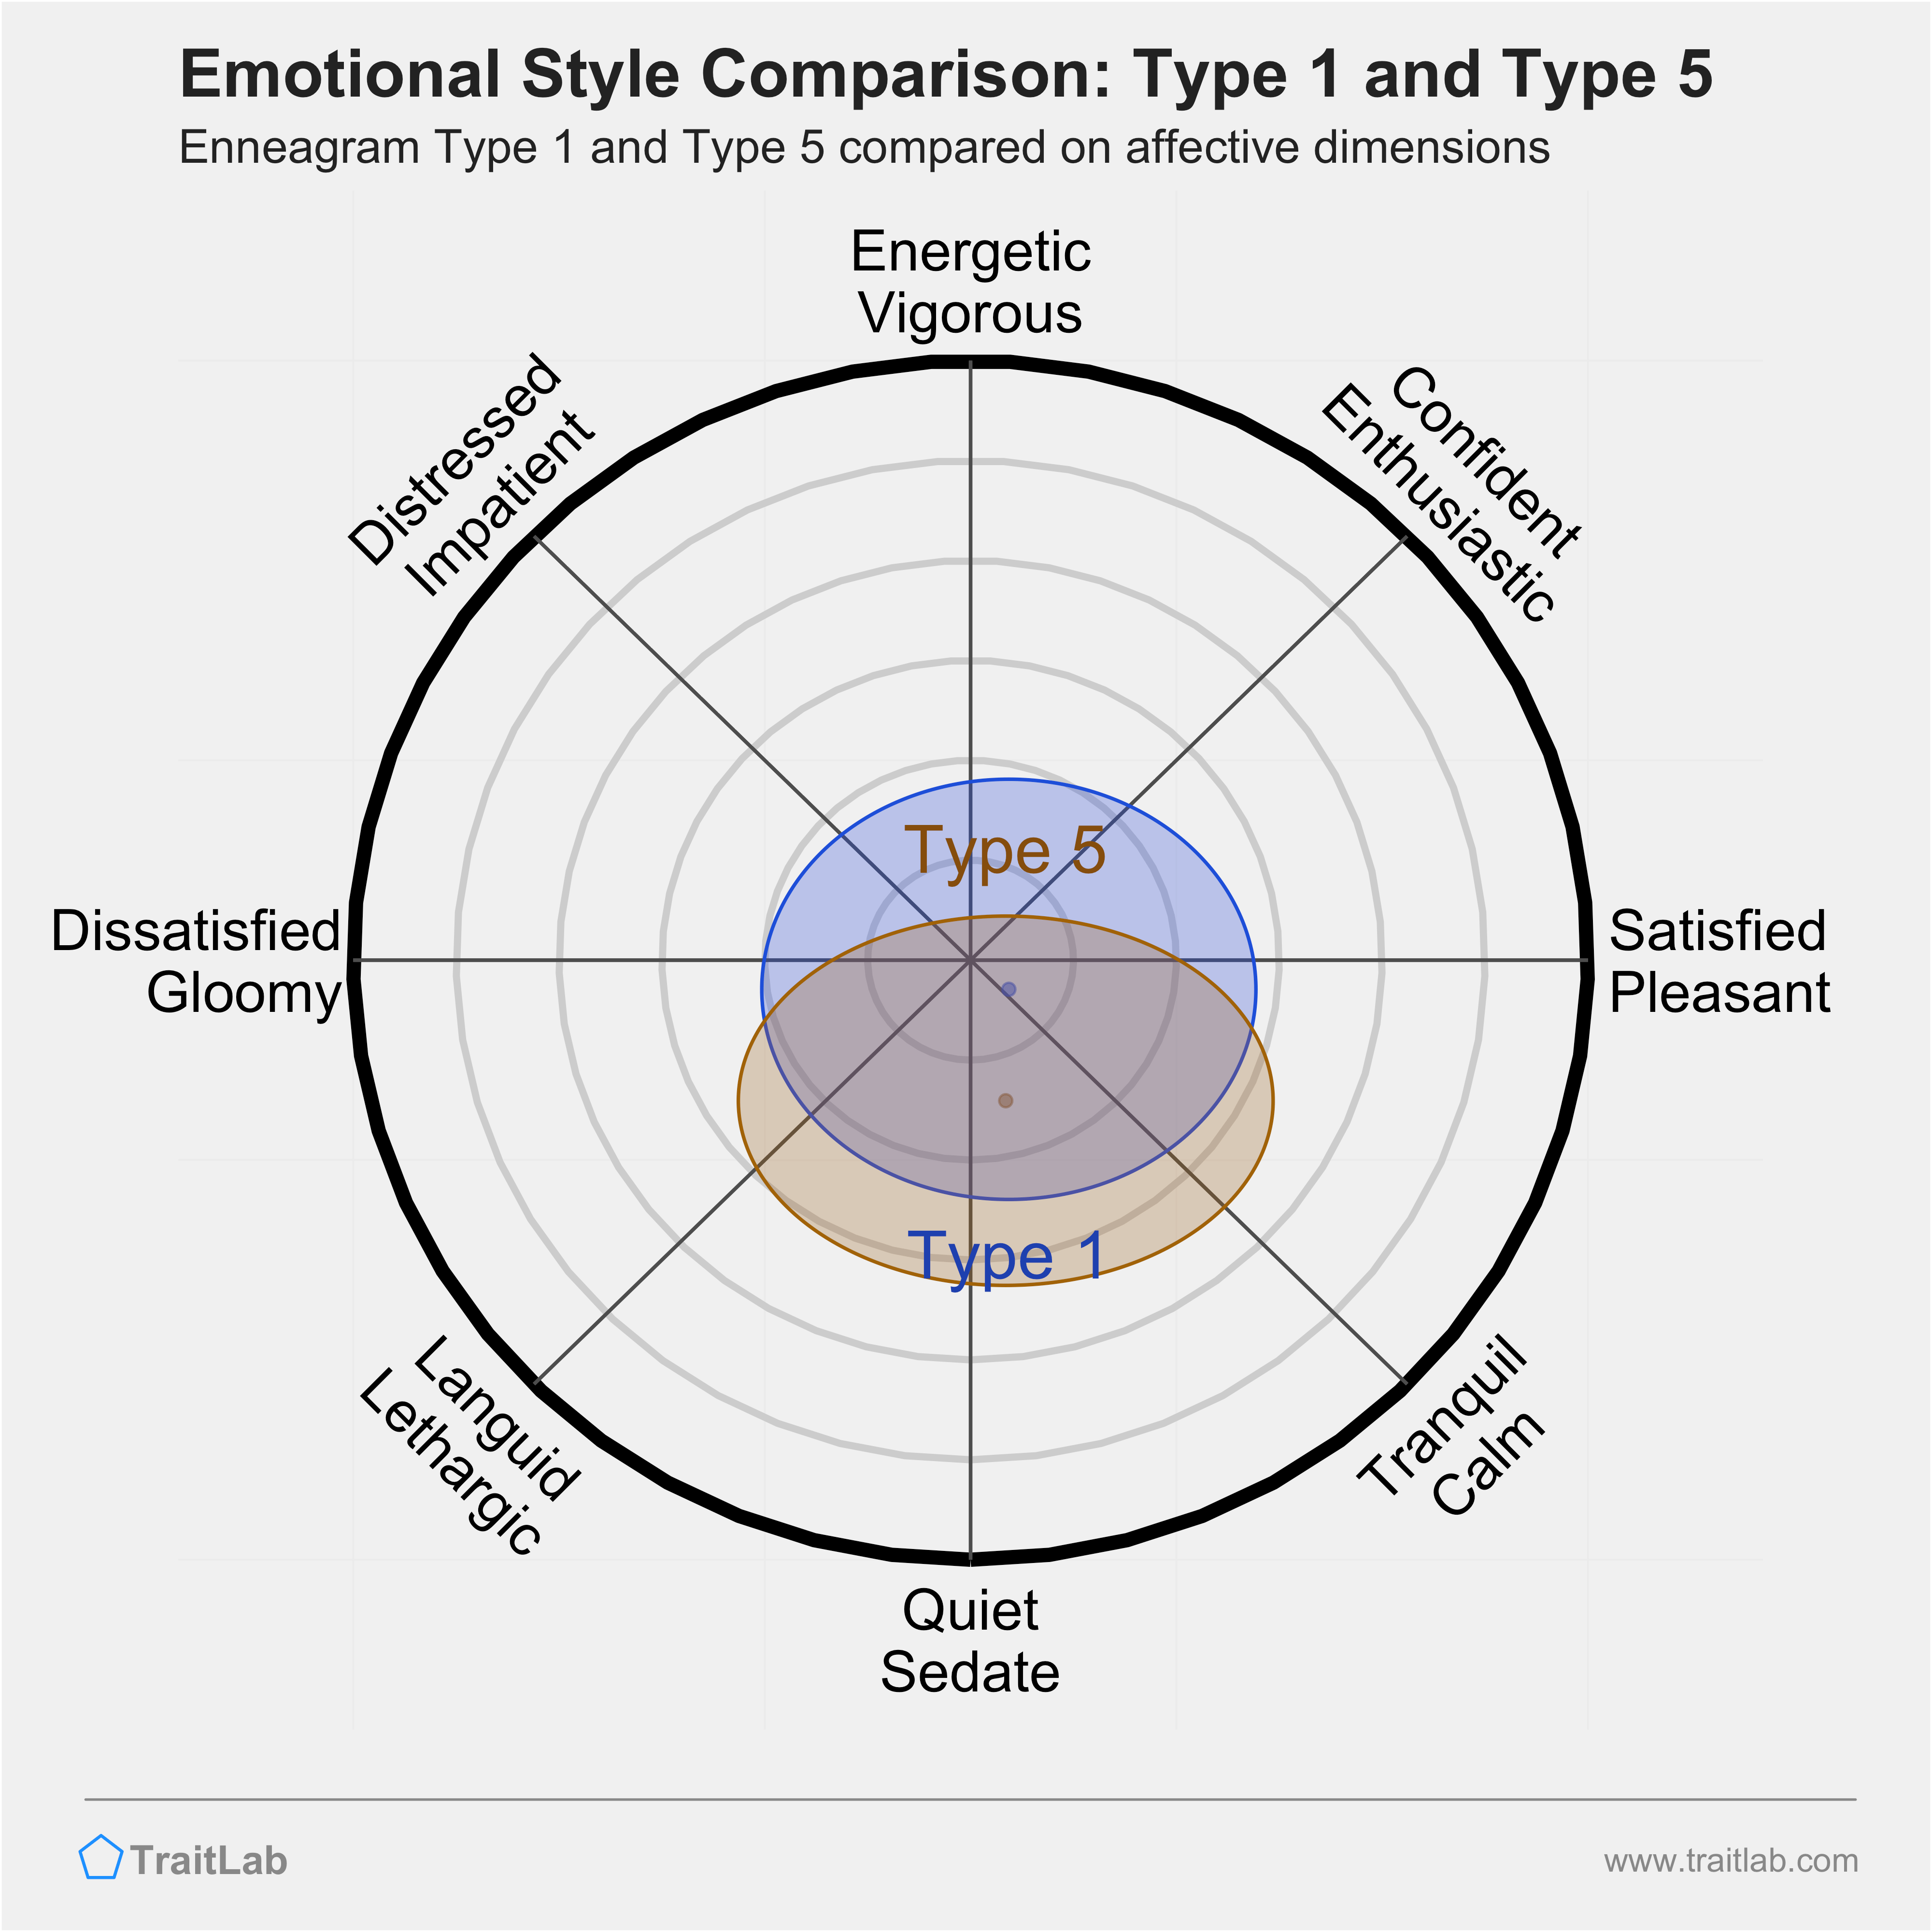 Type 1 and Type 5 comparison across emotional (affective) dimensions